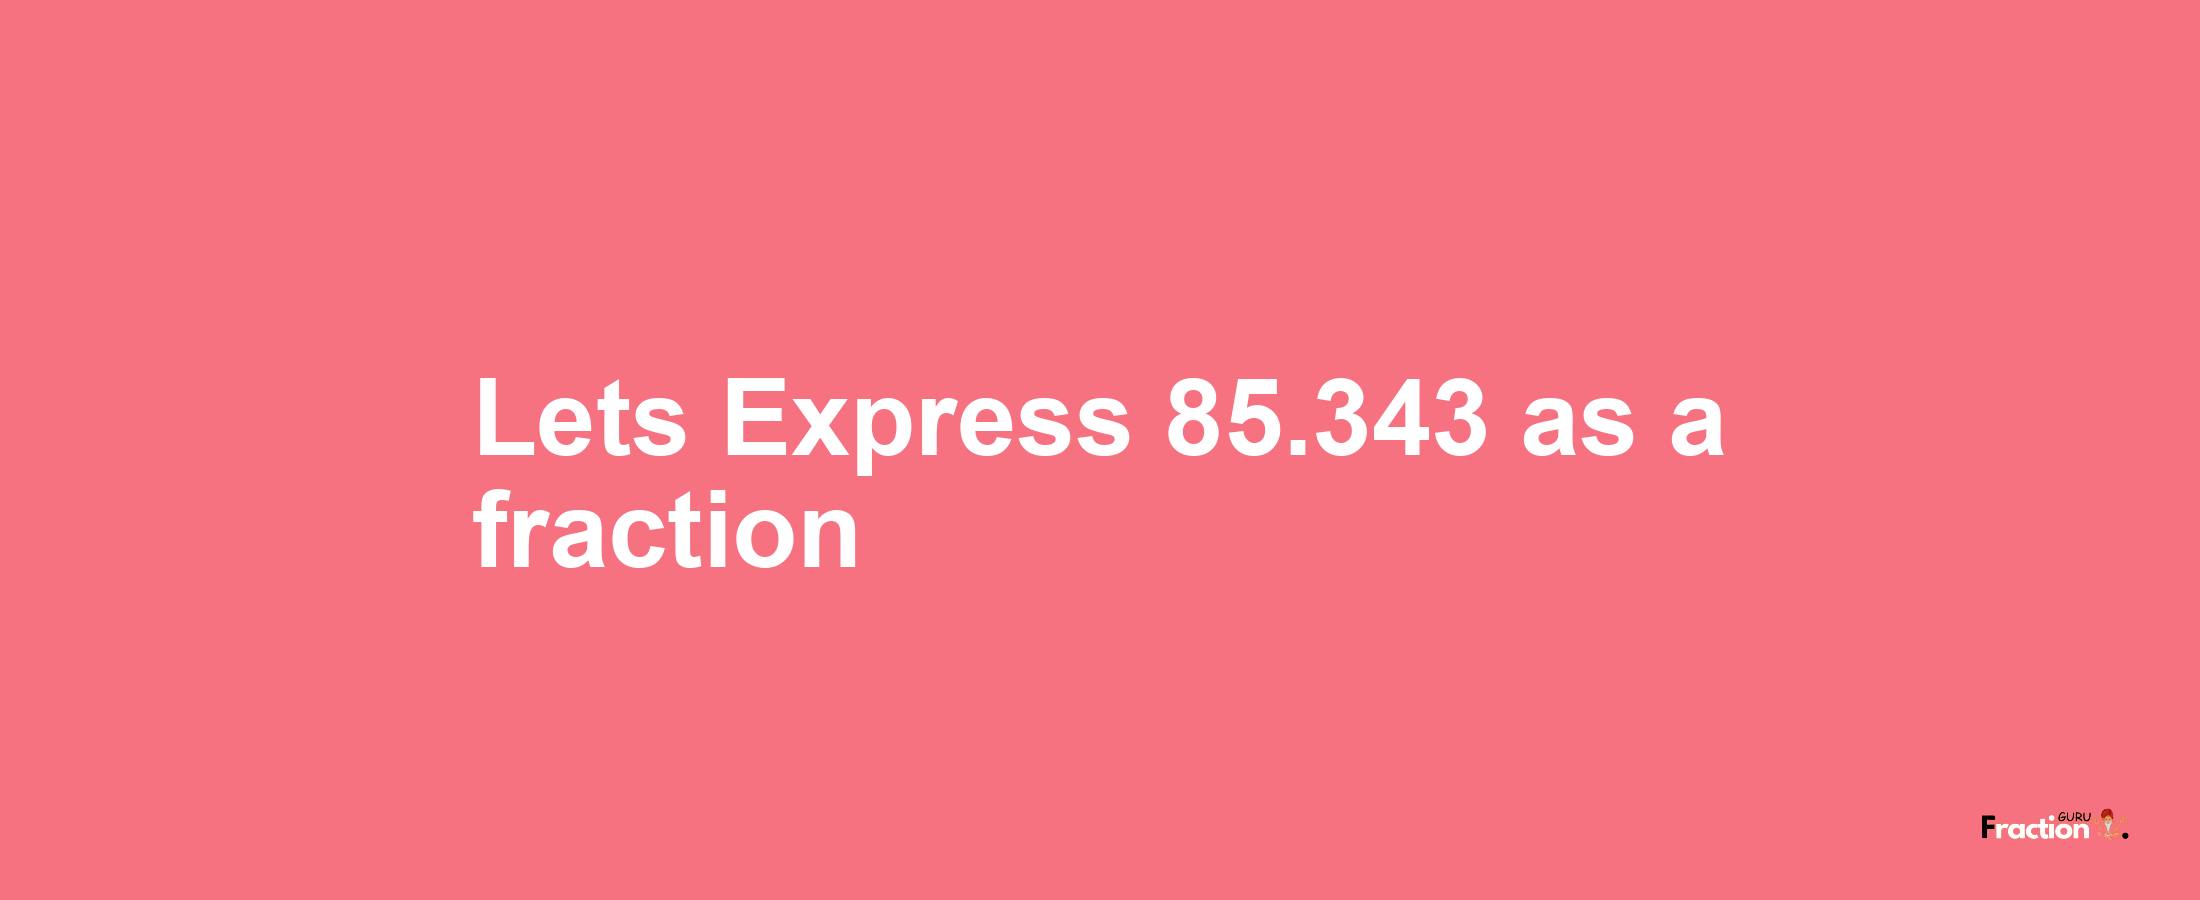 Lets Express 85.343 as afraction